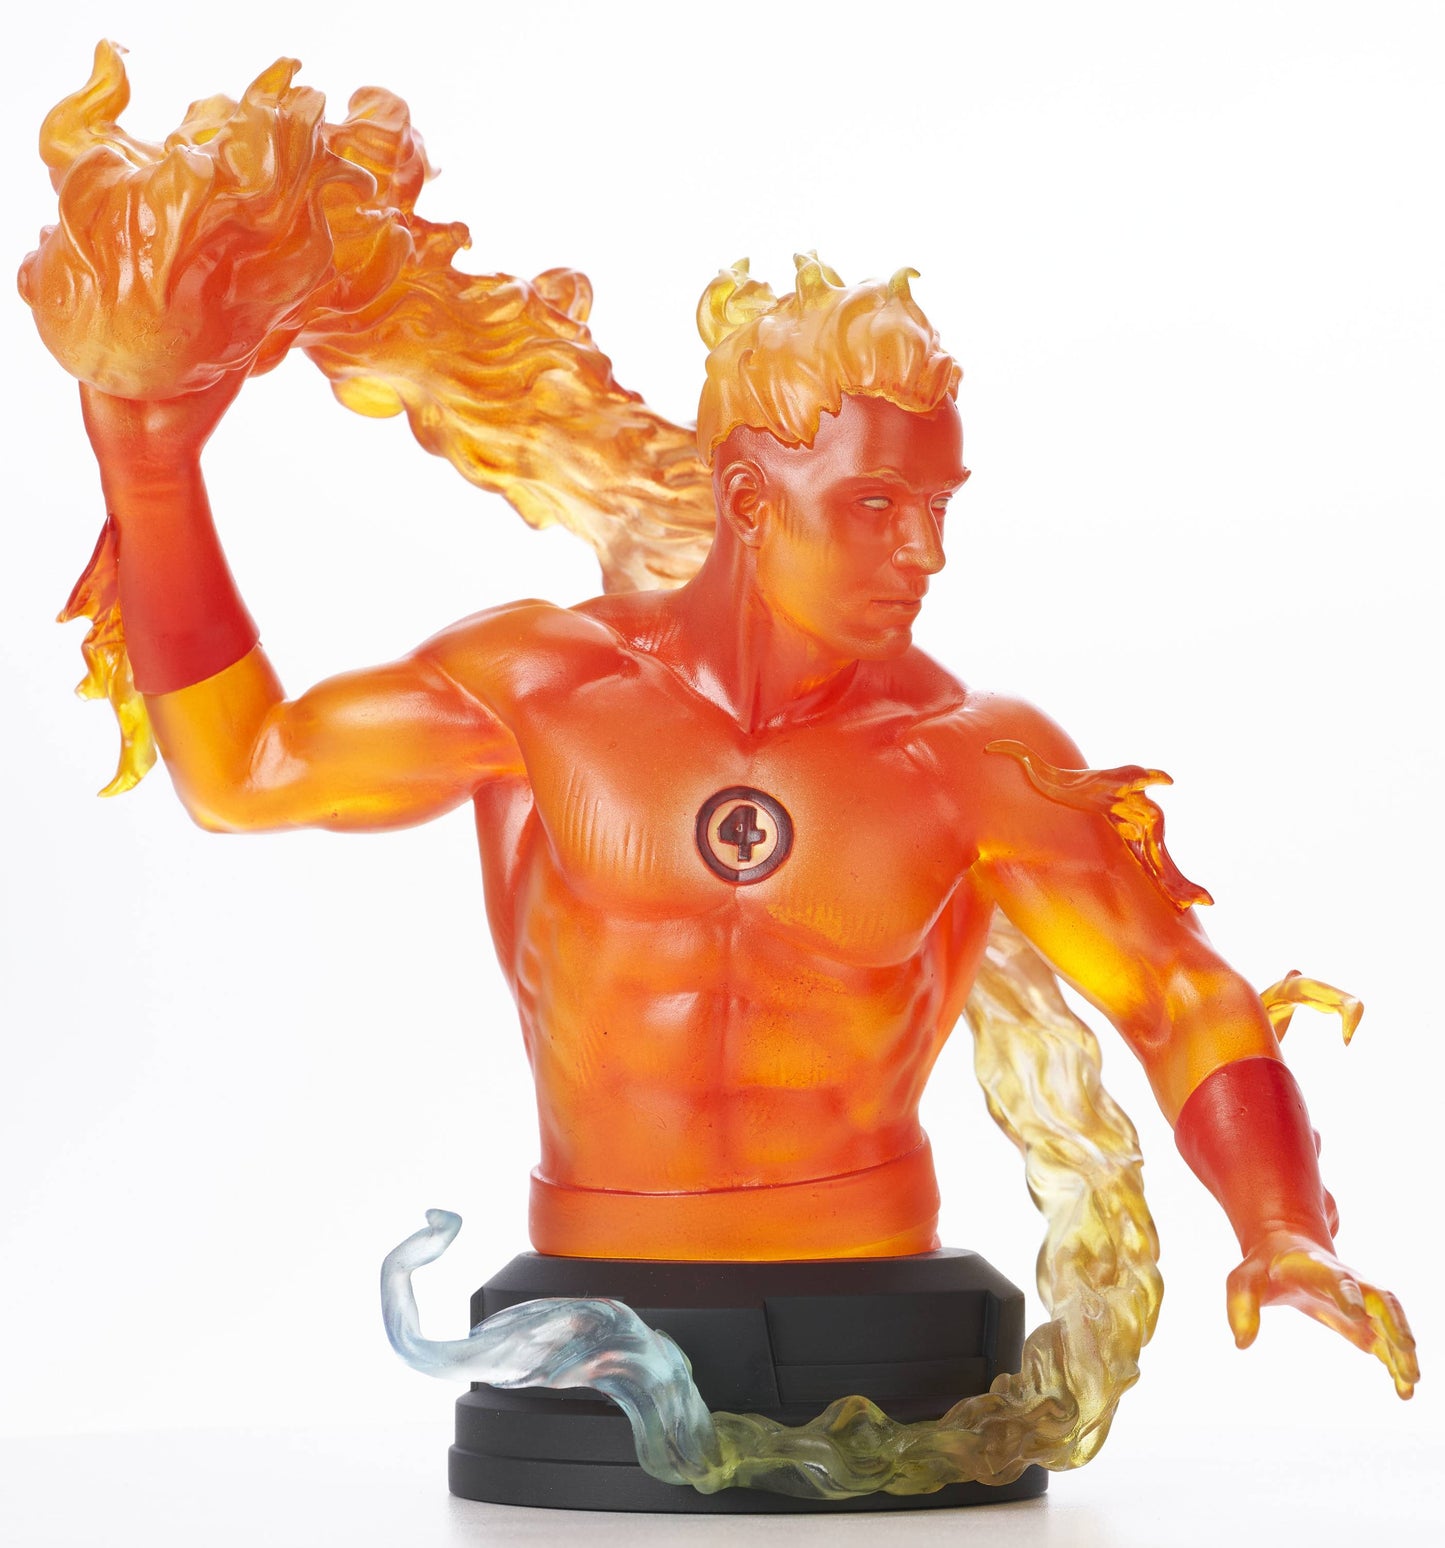 Marvel Animated Human Torch Bust (C: 1-1-2) (5/31/2023)